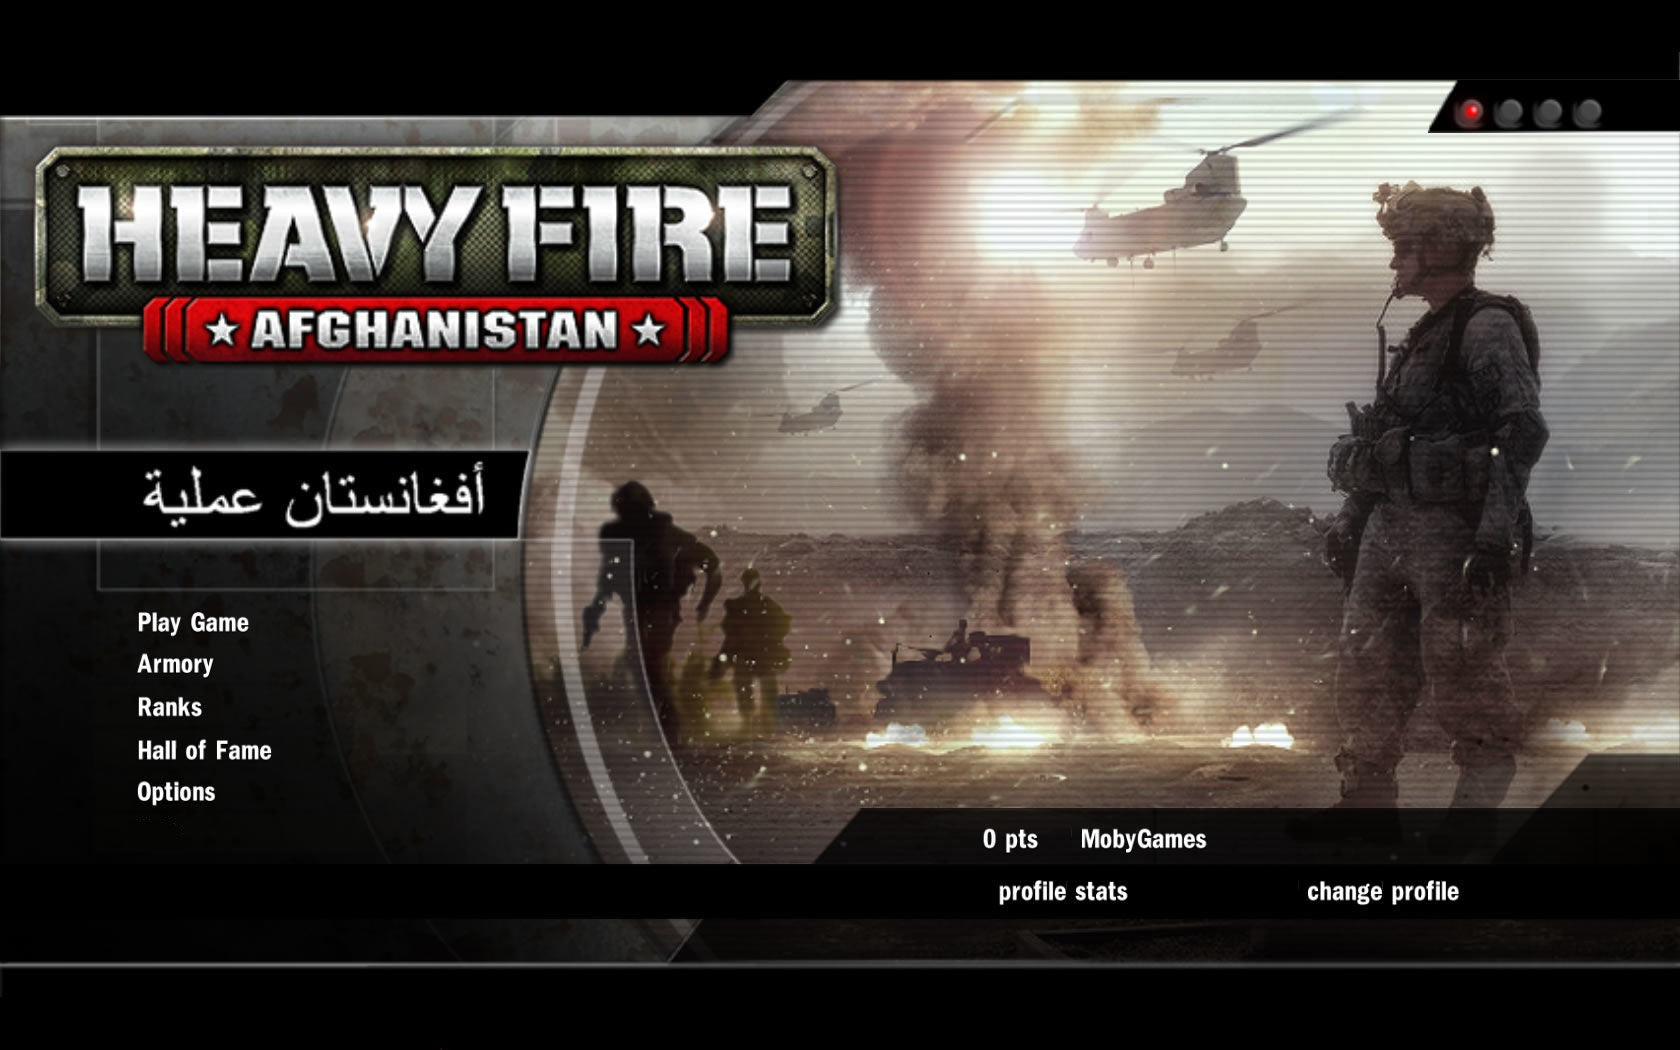 Heavy Fire: Afghanistan - PlayStation 3 (PS3) Game